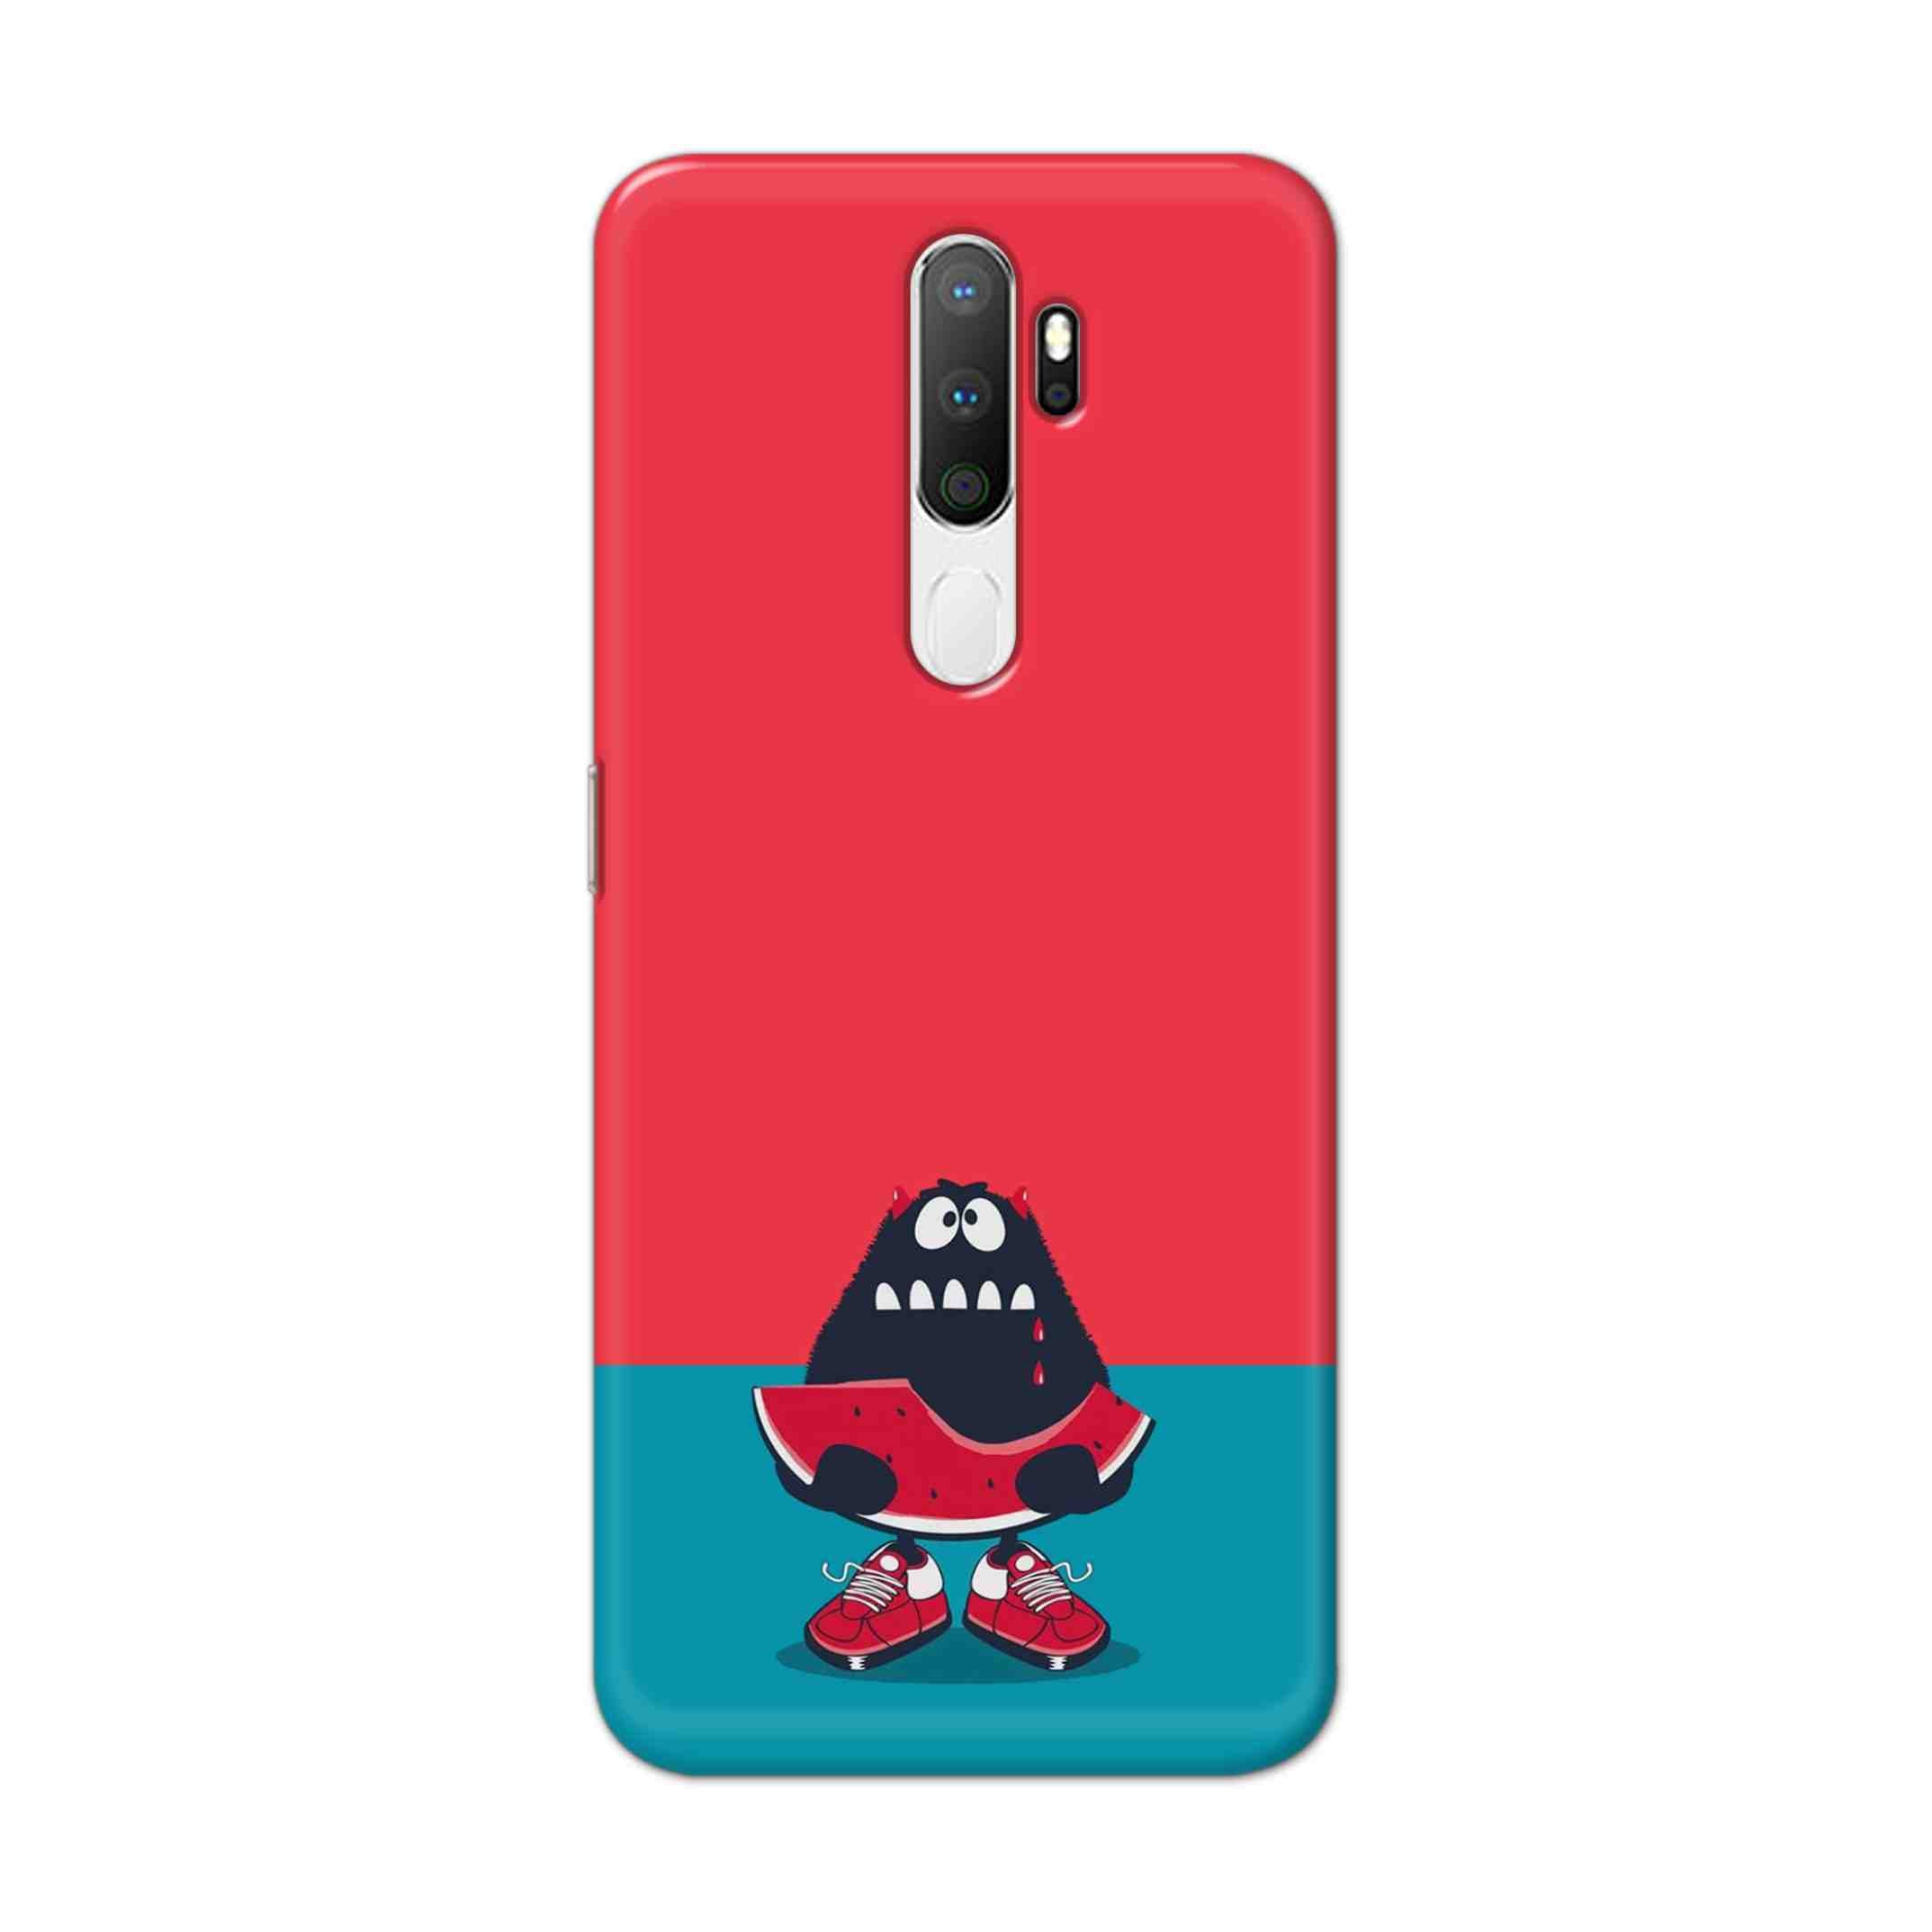 Buy Watermelon Hard Back Mobile Phone Case Cover For Oppo A5 (2020) Online